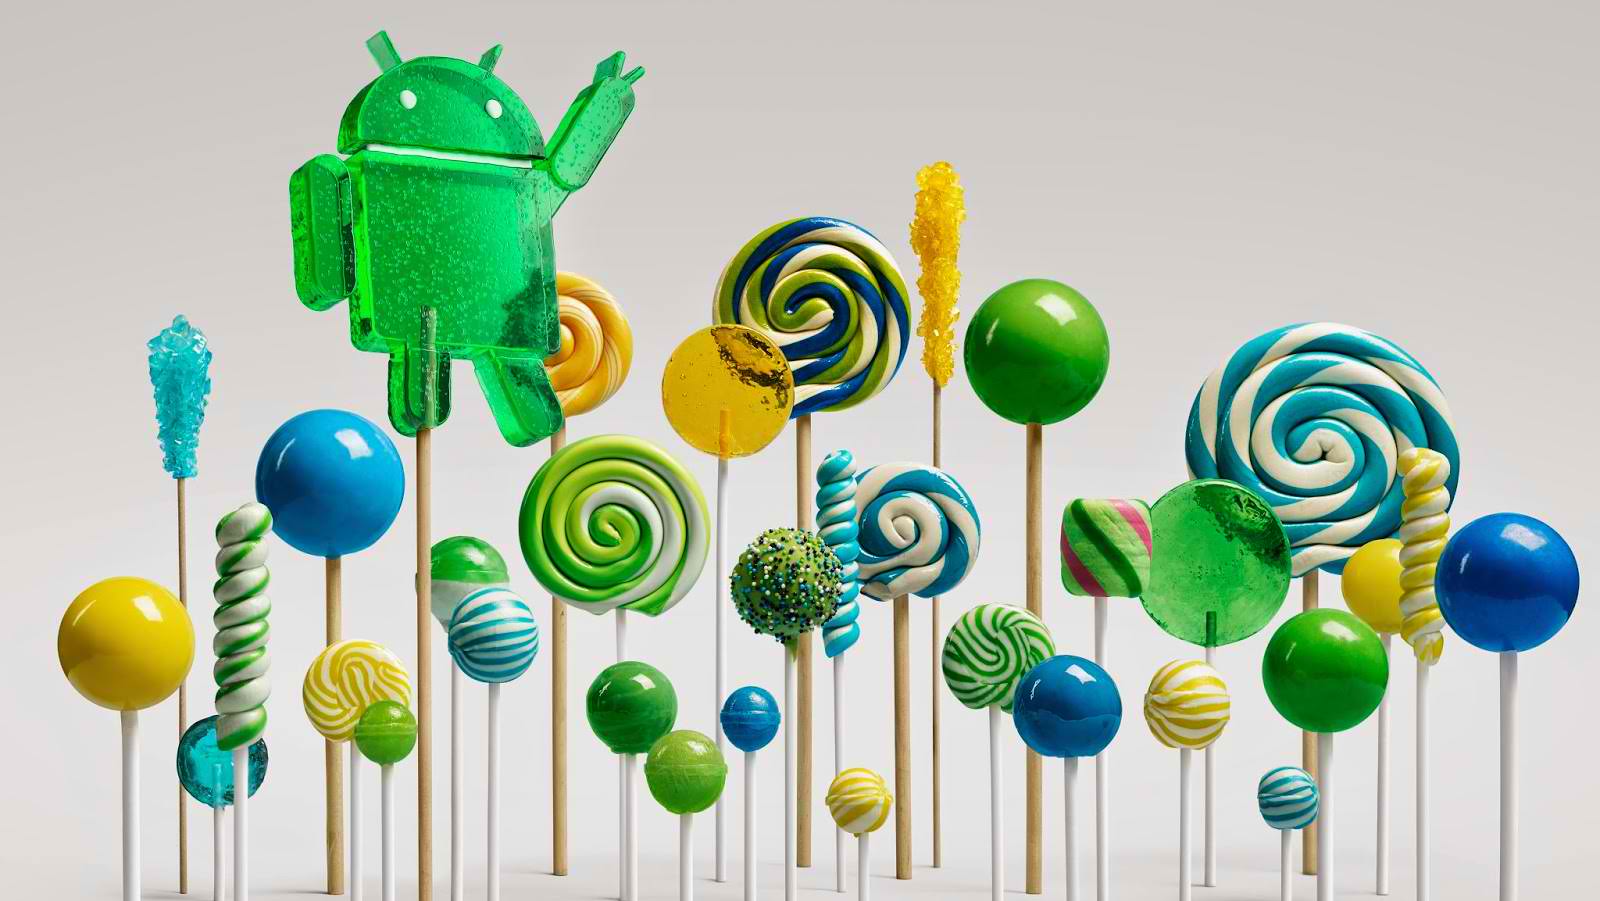 Now that Android 6.0 Marshmallow OS has begun to land on recent flagship devices, more models are starting to receive updates for Marshmallow’s slightly older sibling, Android 5.1.1 Lollipop. The rugged version of Samsung’s 2015 flagship, the Galaxy S6 Active, along with the Galaxy E7 and Motorola’s 2014 Moto G, are among them.